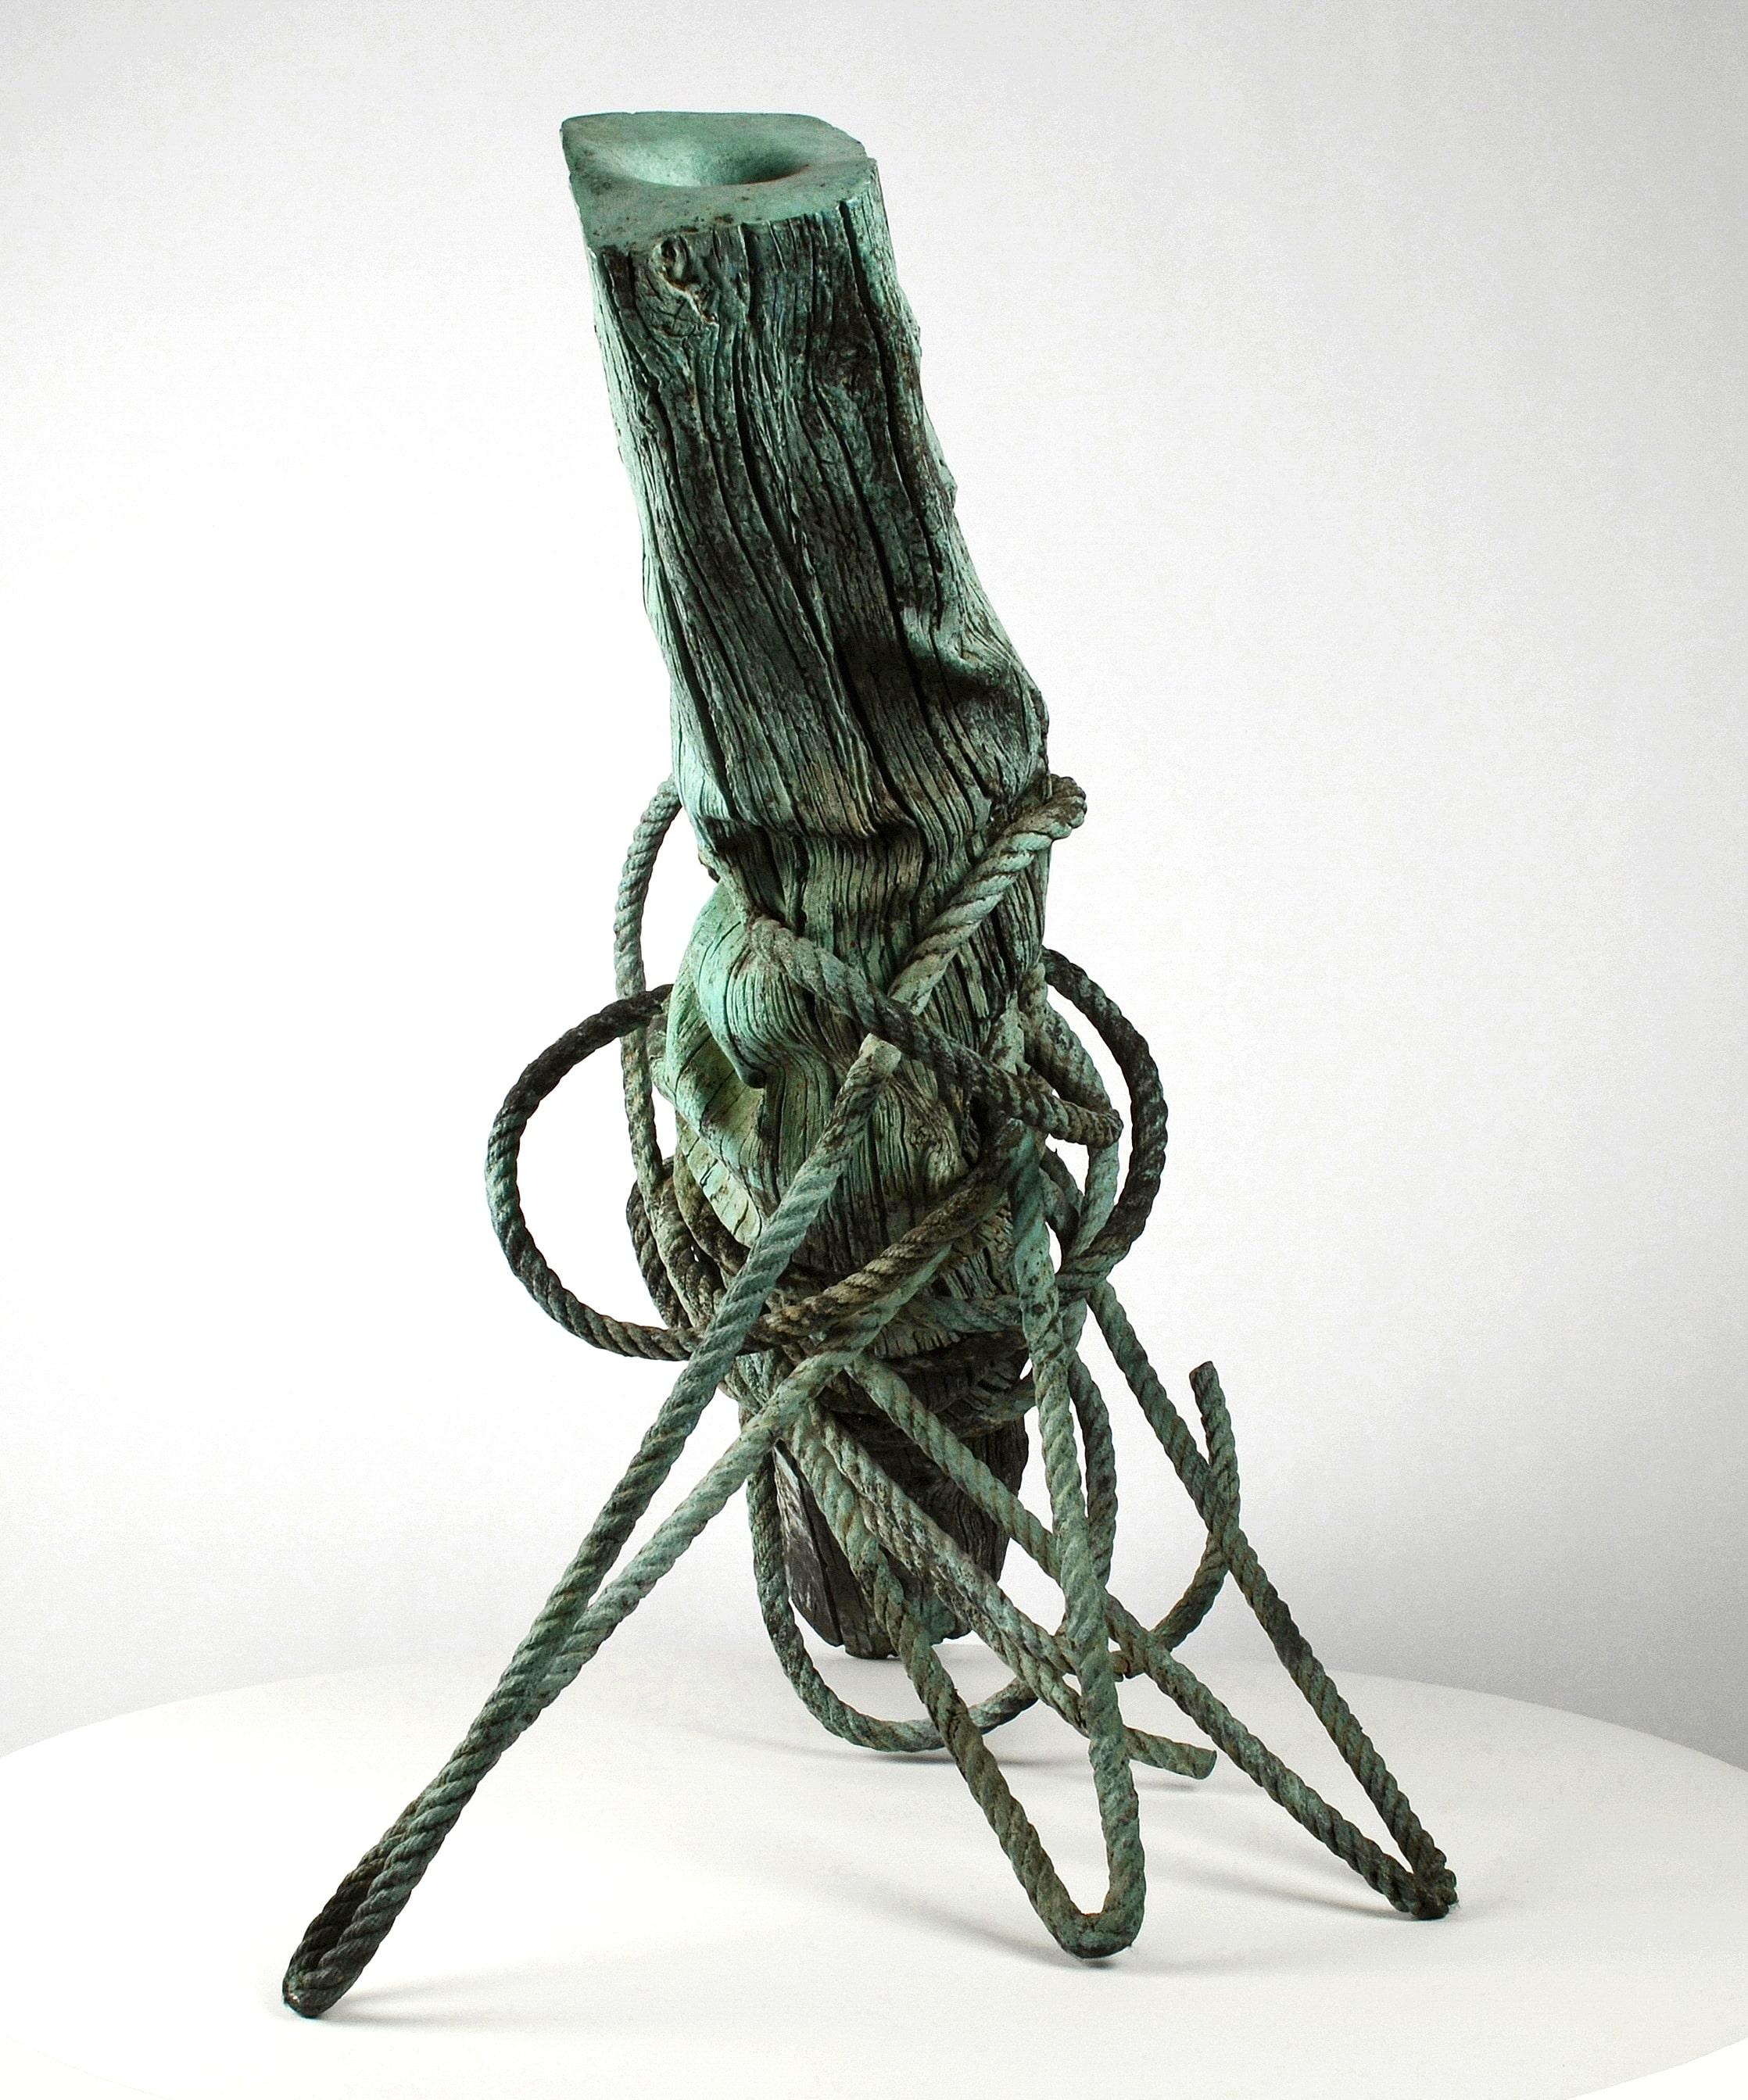 The Anthropocene by Romain Langlois - Wood-like bronze sculpture, green patina For Sale 3